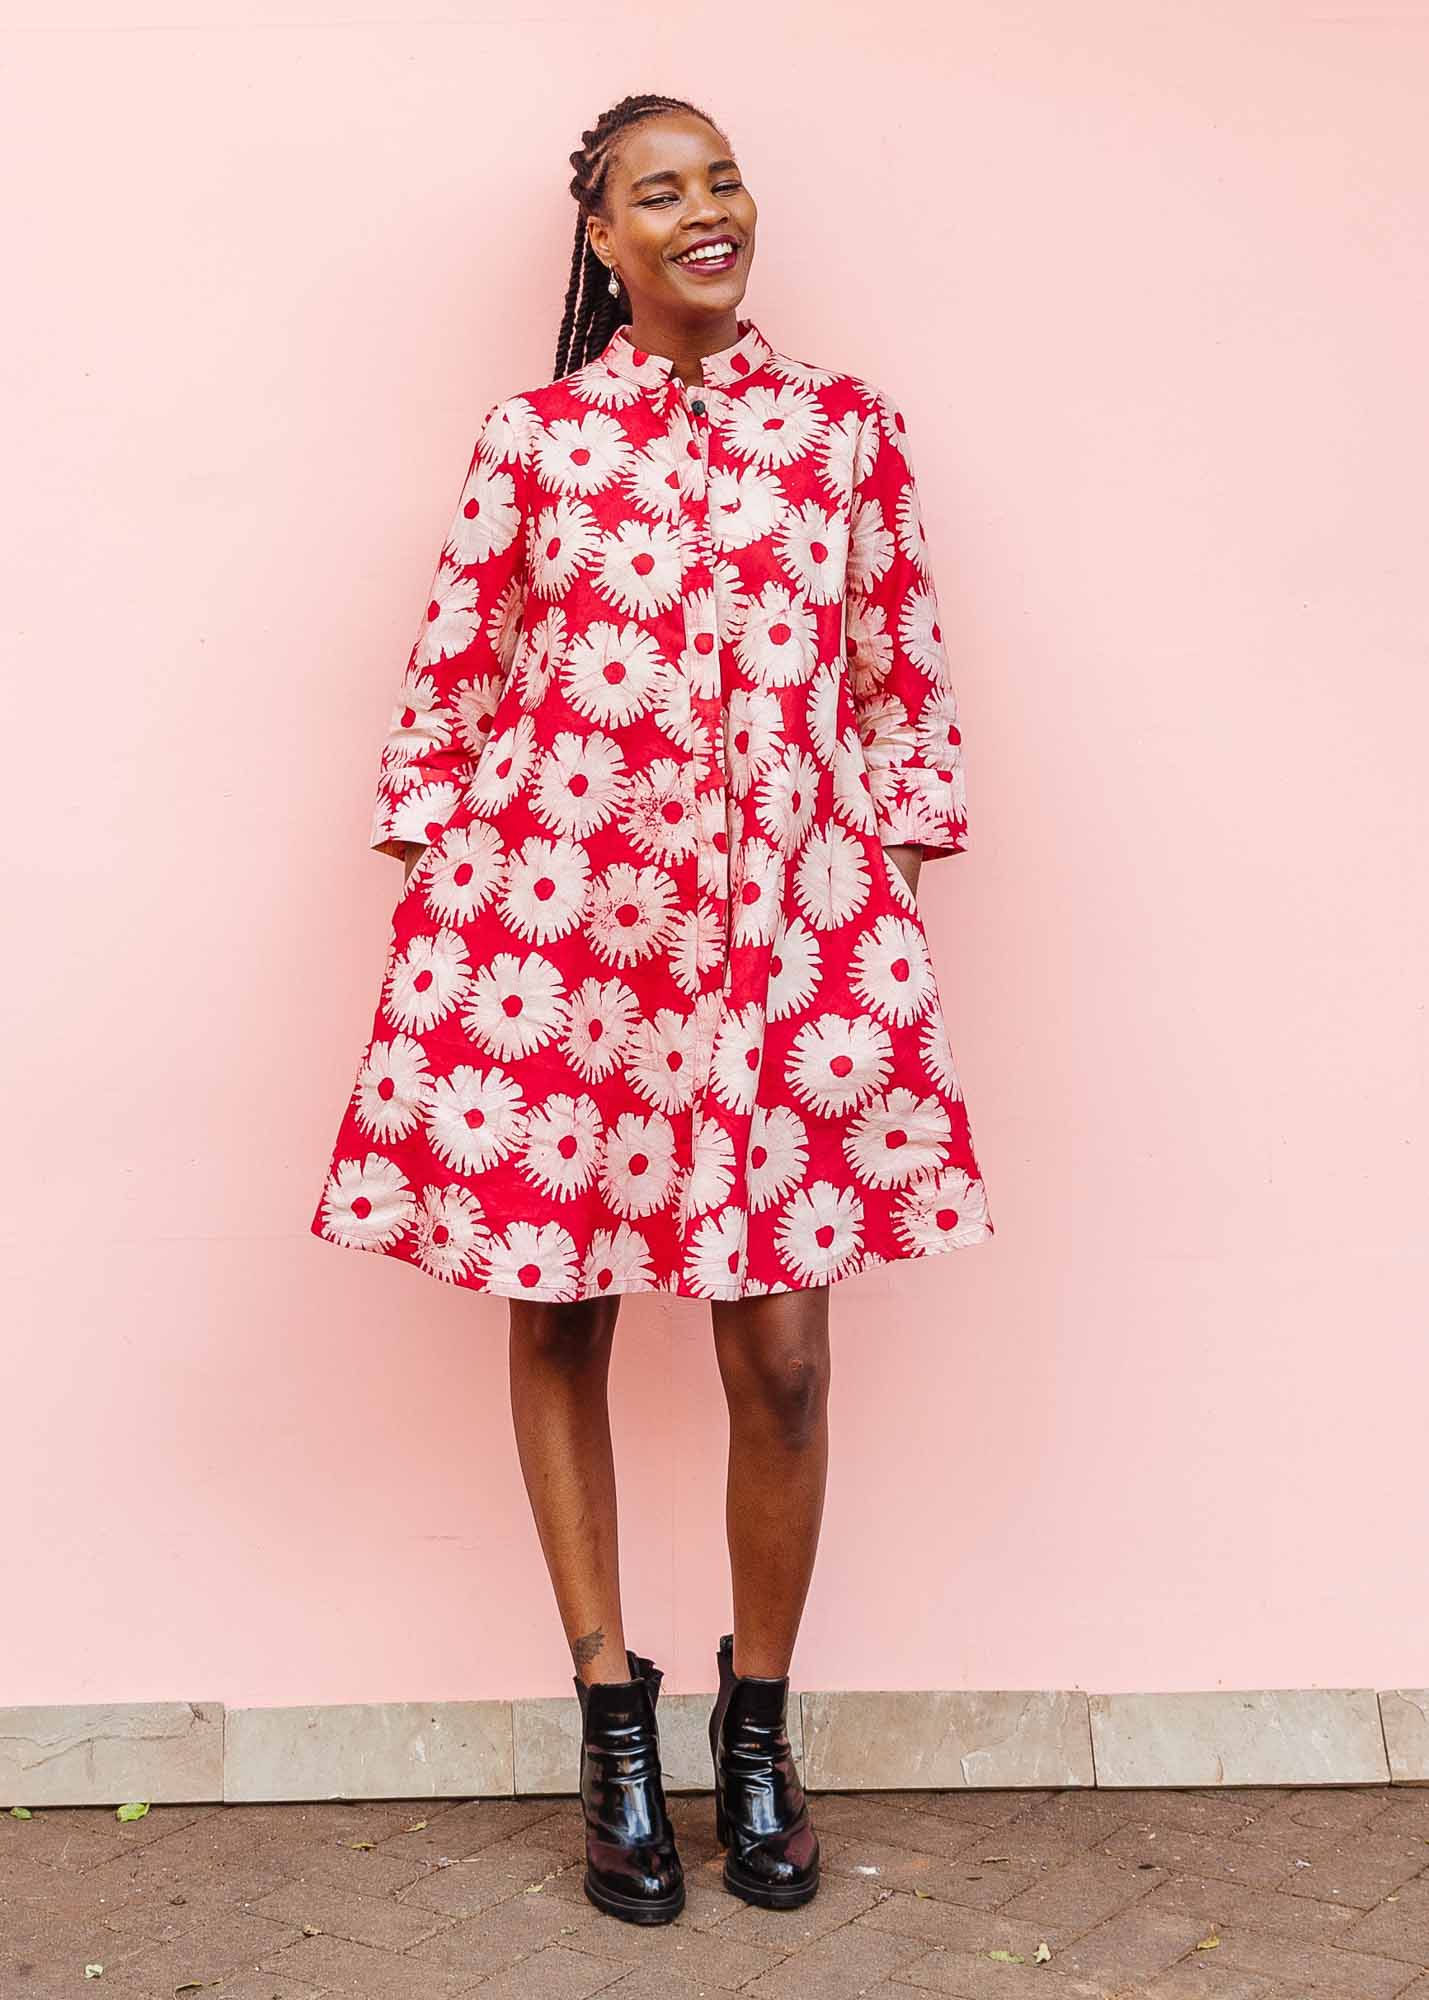 The model is wearing pink and white floral print